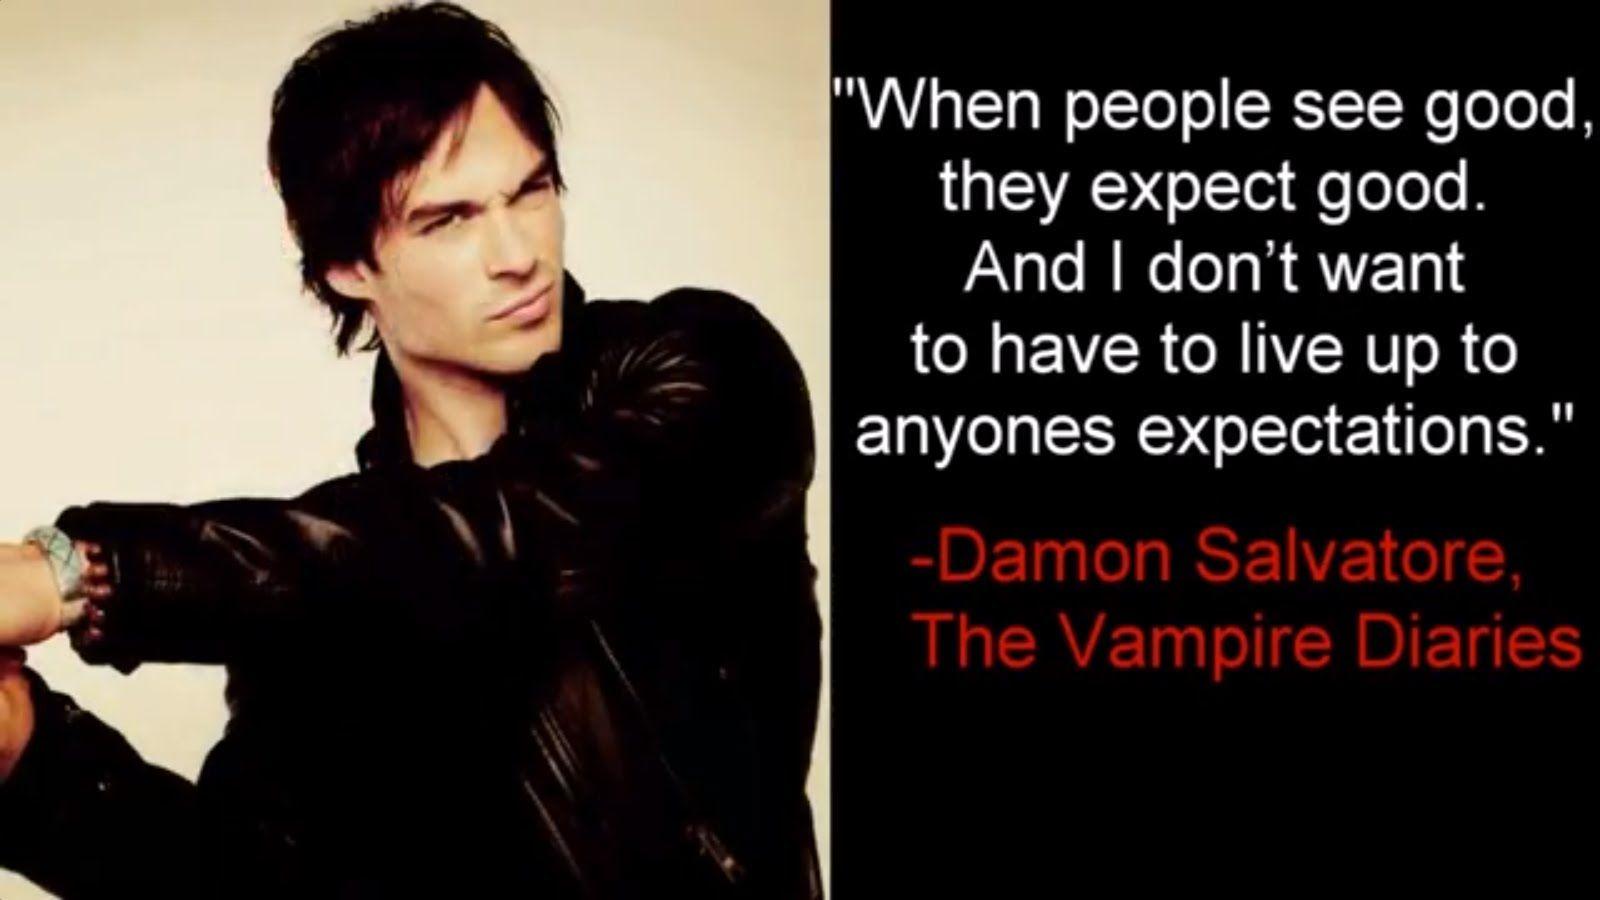 The Vampire Diaries Quotes Wallpapers - Wallpaper Cave